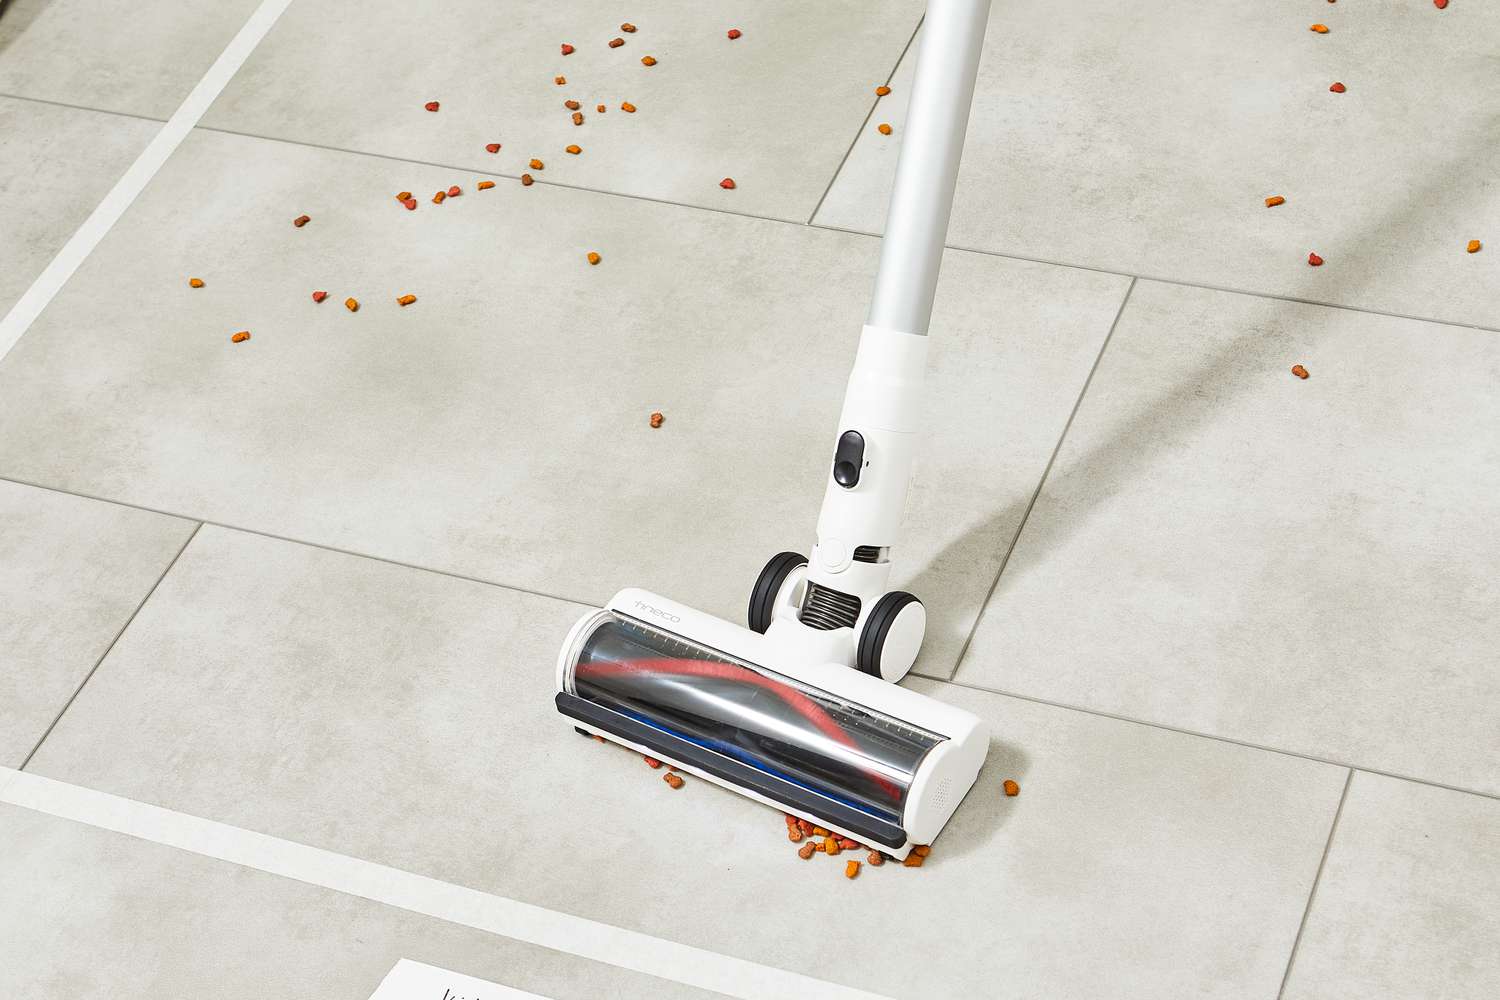 Tineco Pure One S11 Smart Stick/Handheld Vacuum sweeping up food on tiled white floor